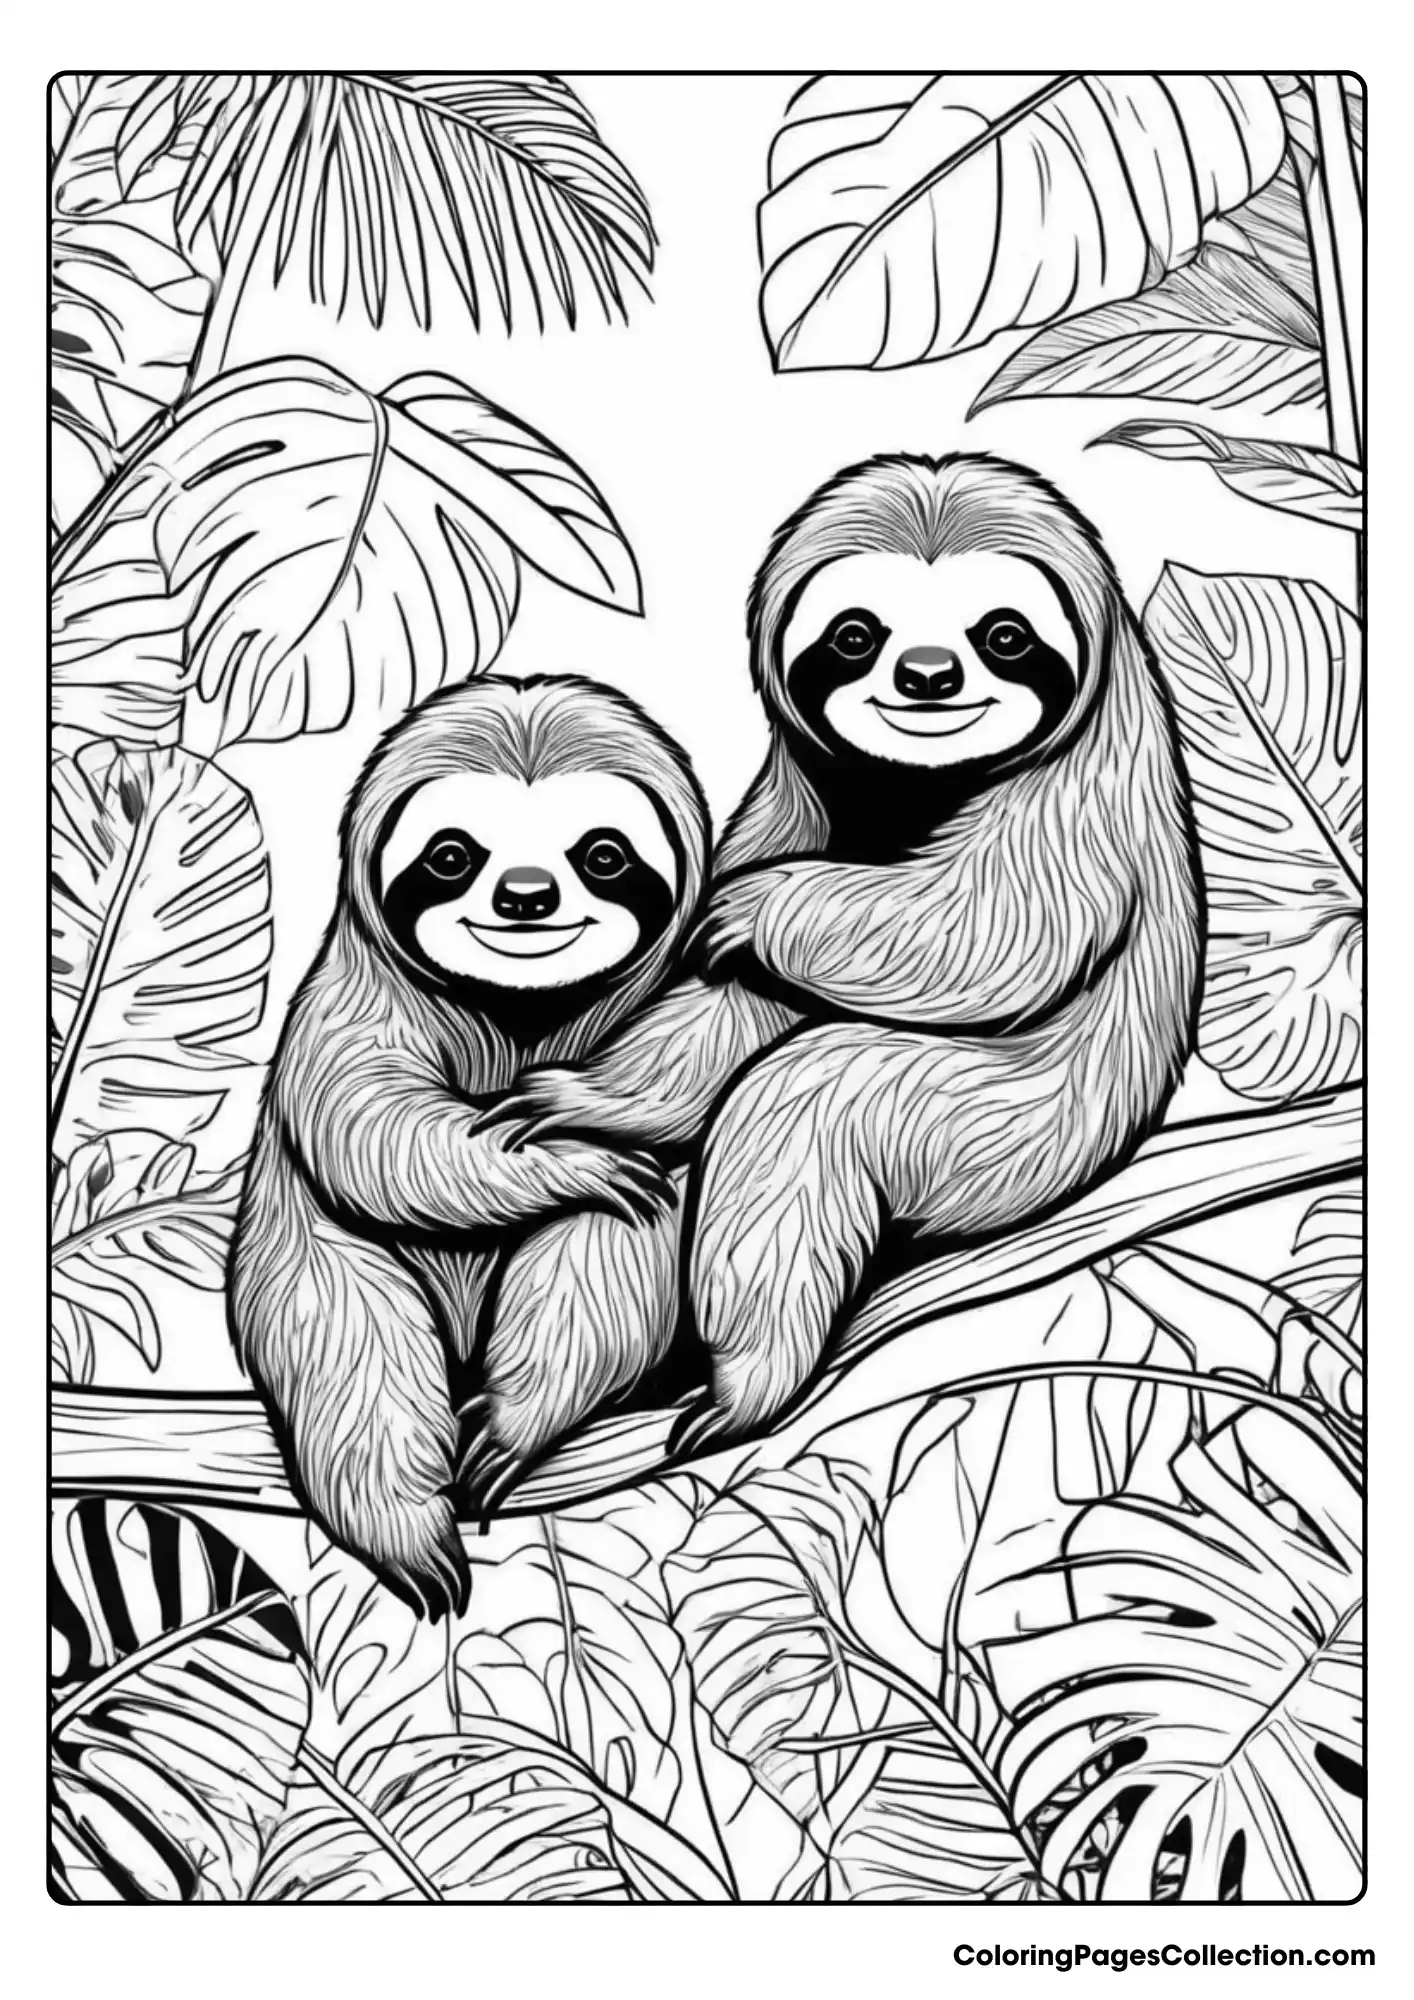 Coloring pages for teens, Cute Koalas 